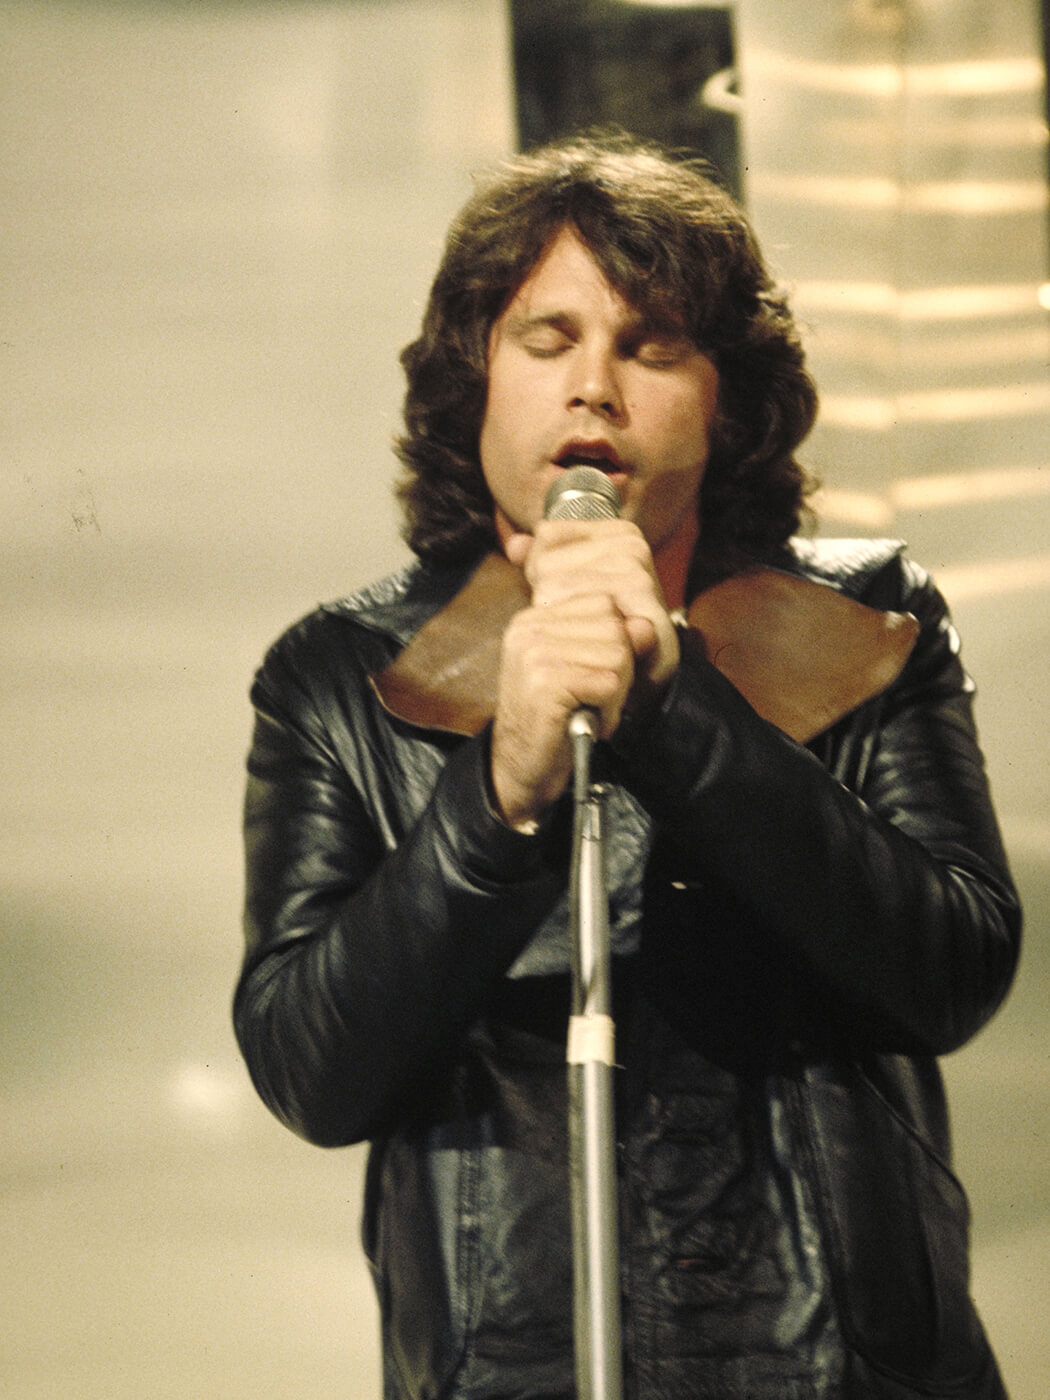 Jim Morrison of The Doors performing in 1968, photo by Chris Walter/WireImage via Getty Images